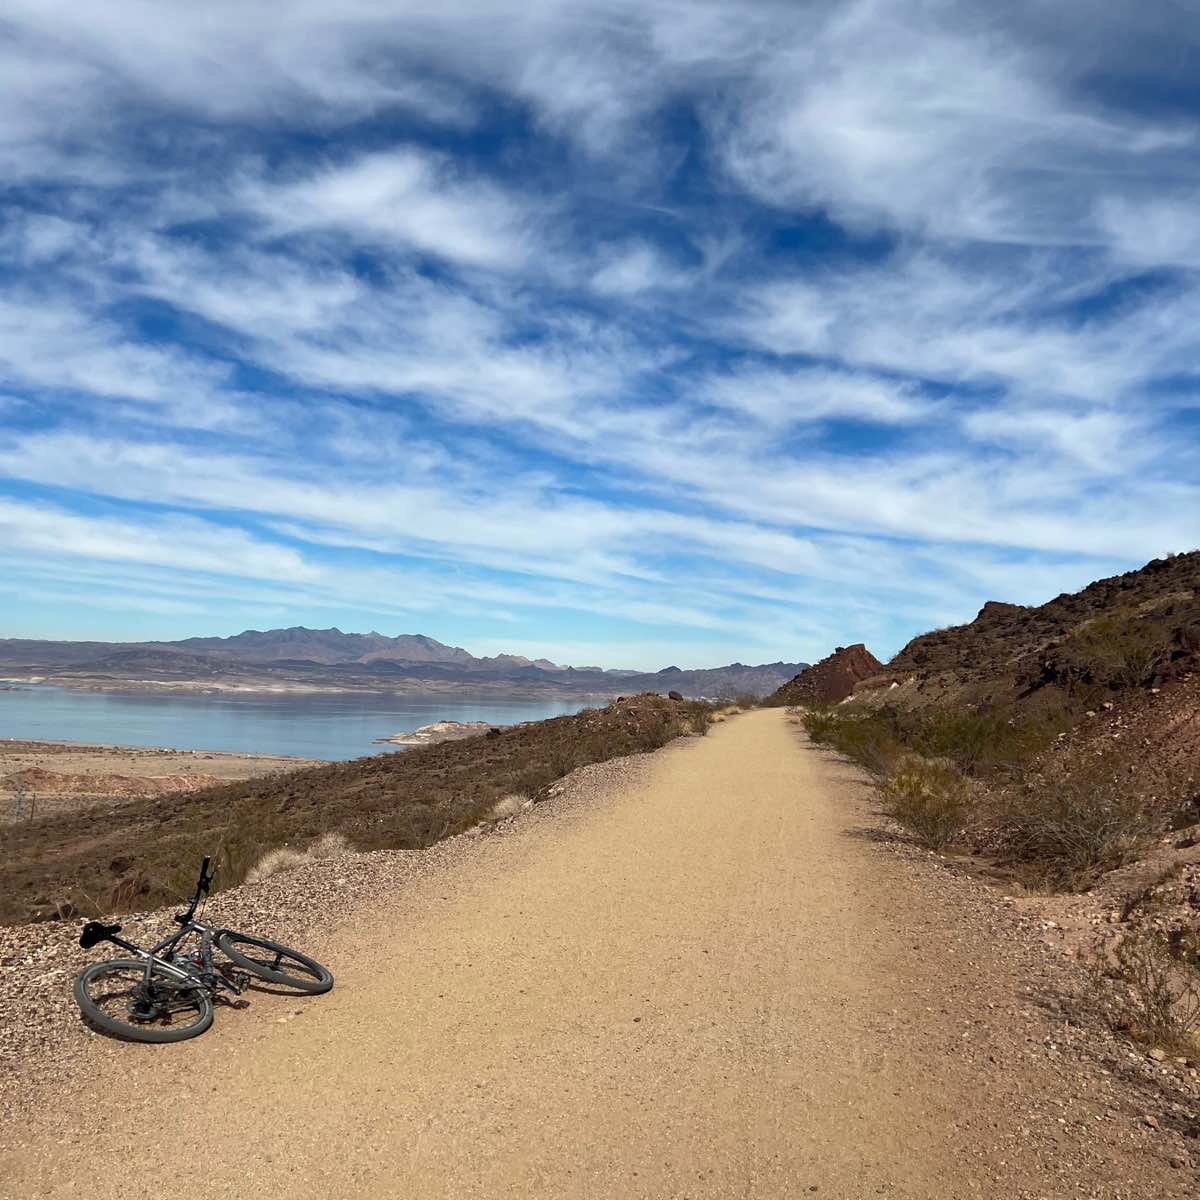 bikerumor pic of the day a mountain bike lies on its side along a wide dirt trail on the side of a long low mountain, the sky is large and covered in cotton candy like clouds with the blue sky behind peeking out